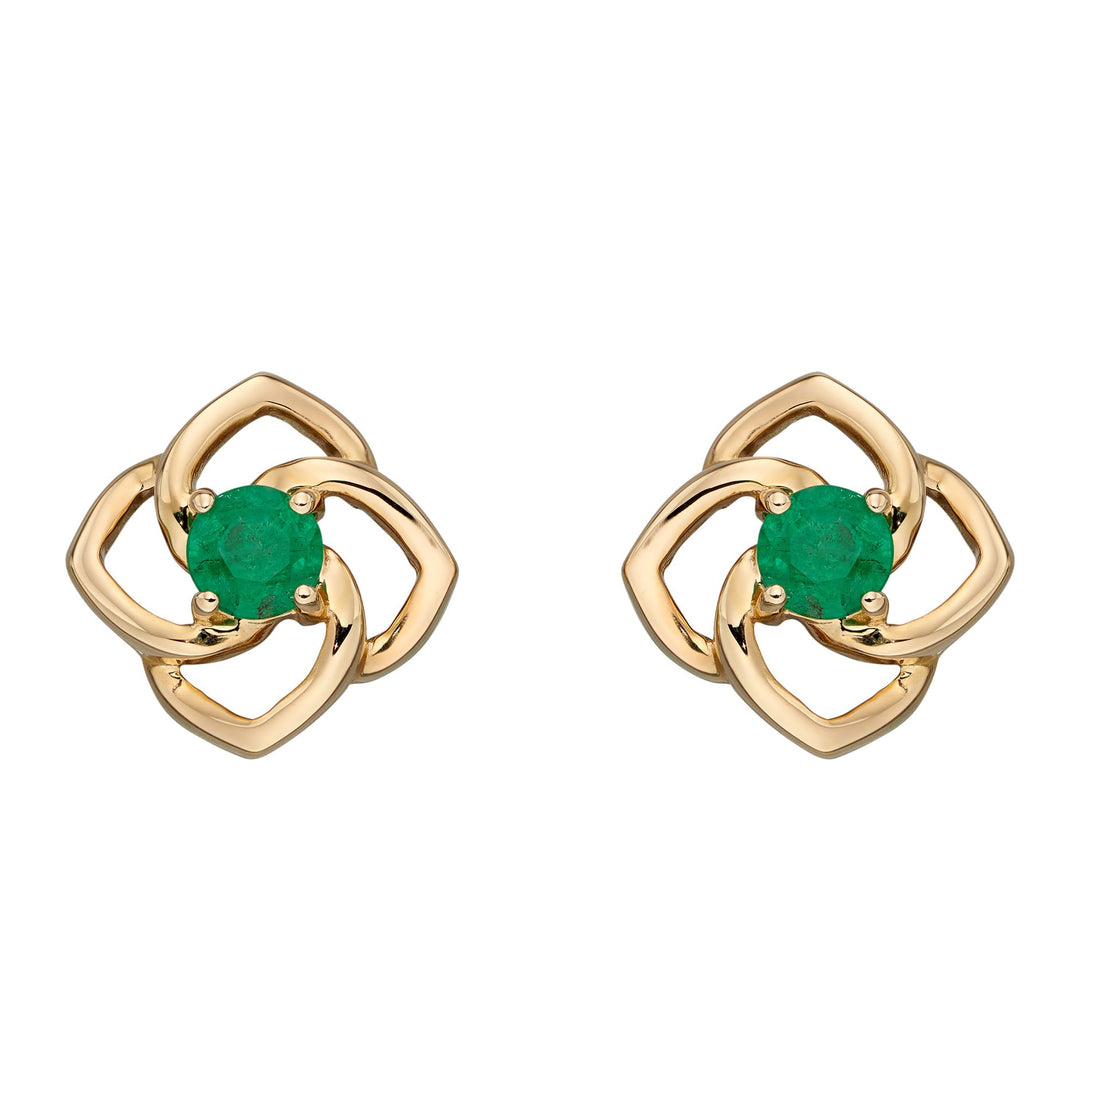 Cut Out Flower Stud Earrings with Emerald in 9ct Yellow Gold